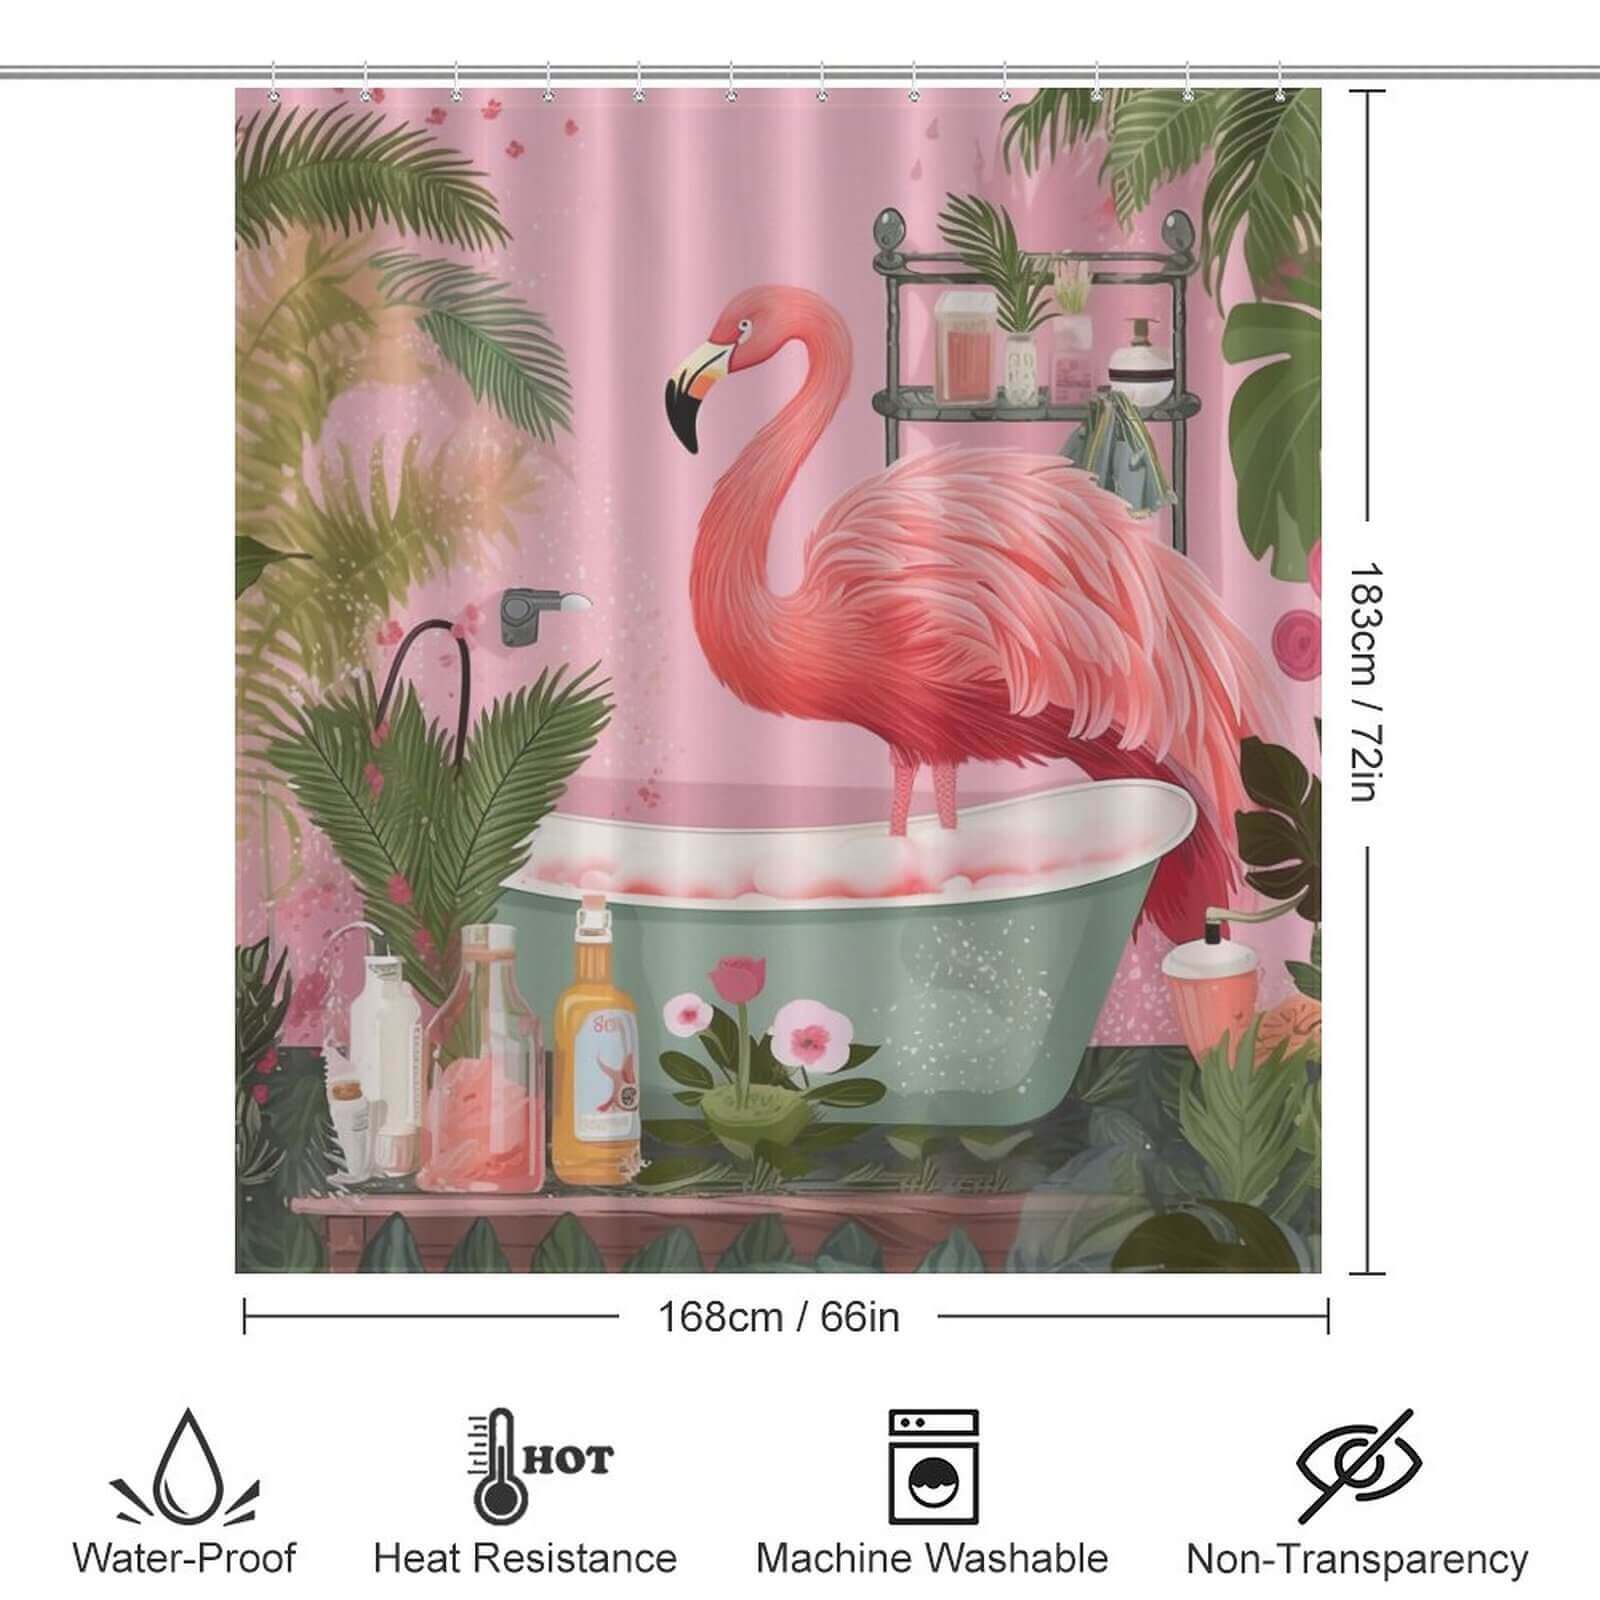 Boho Tropical Flamingo shower curtain from Cotton Cat for your bathroom.